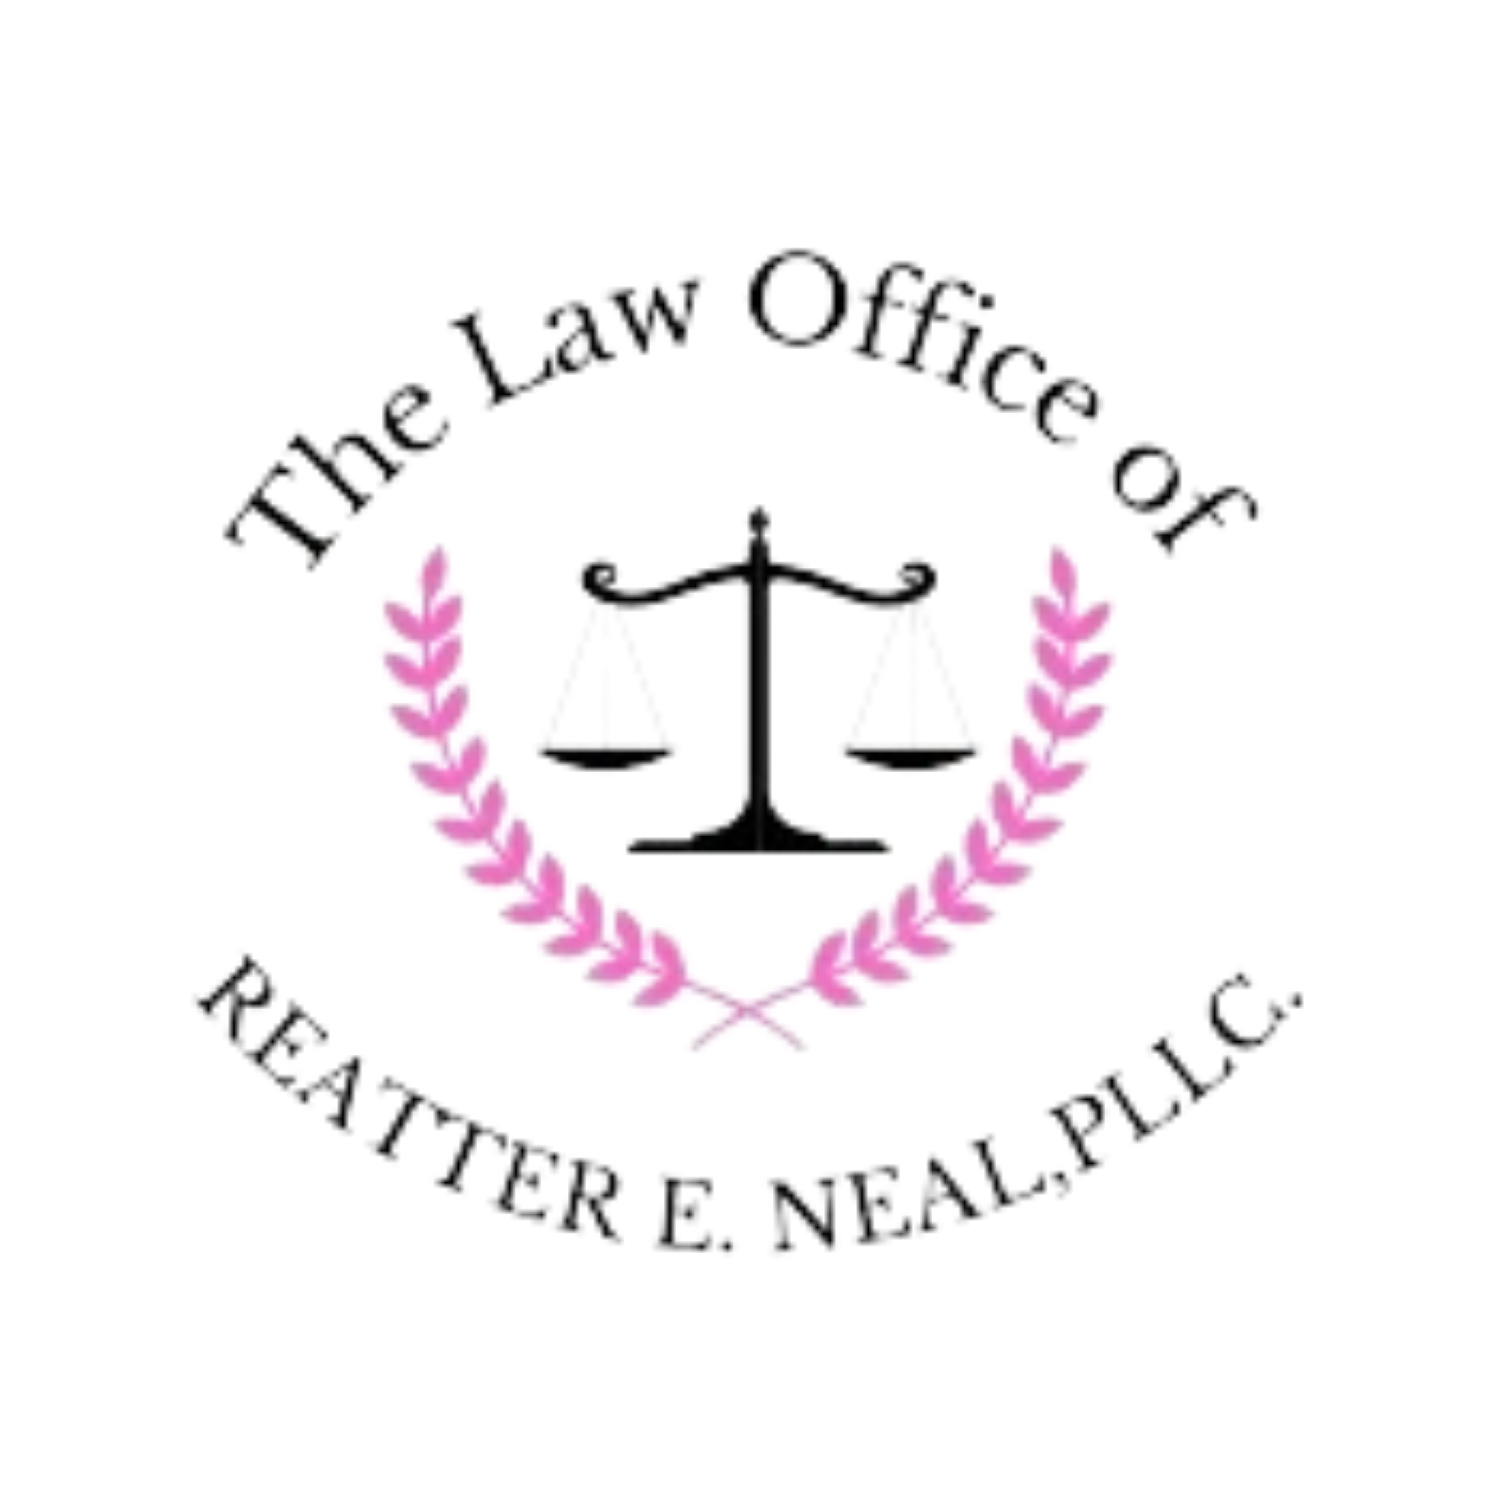 The Law Office of Reatter E. Neal, PLLC